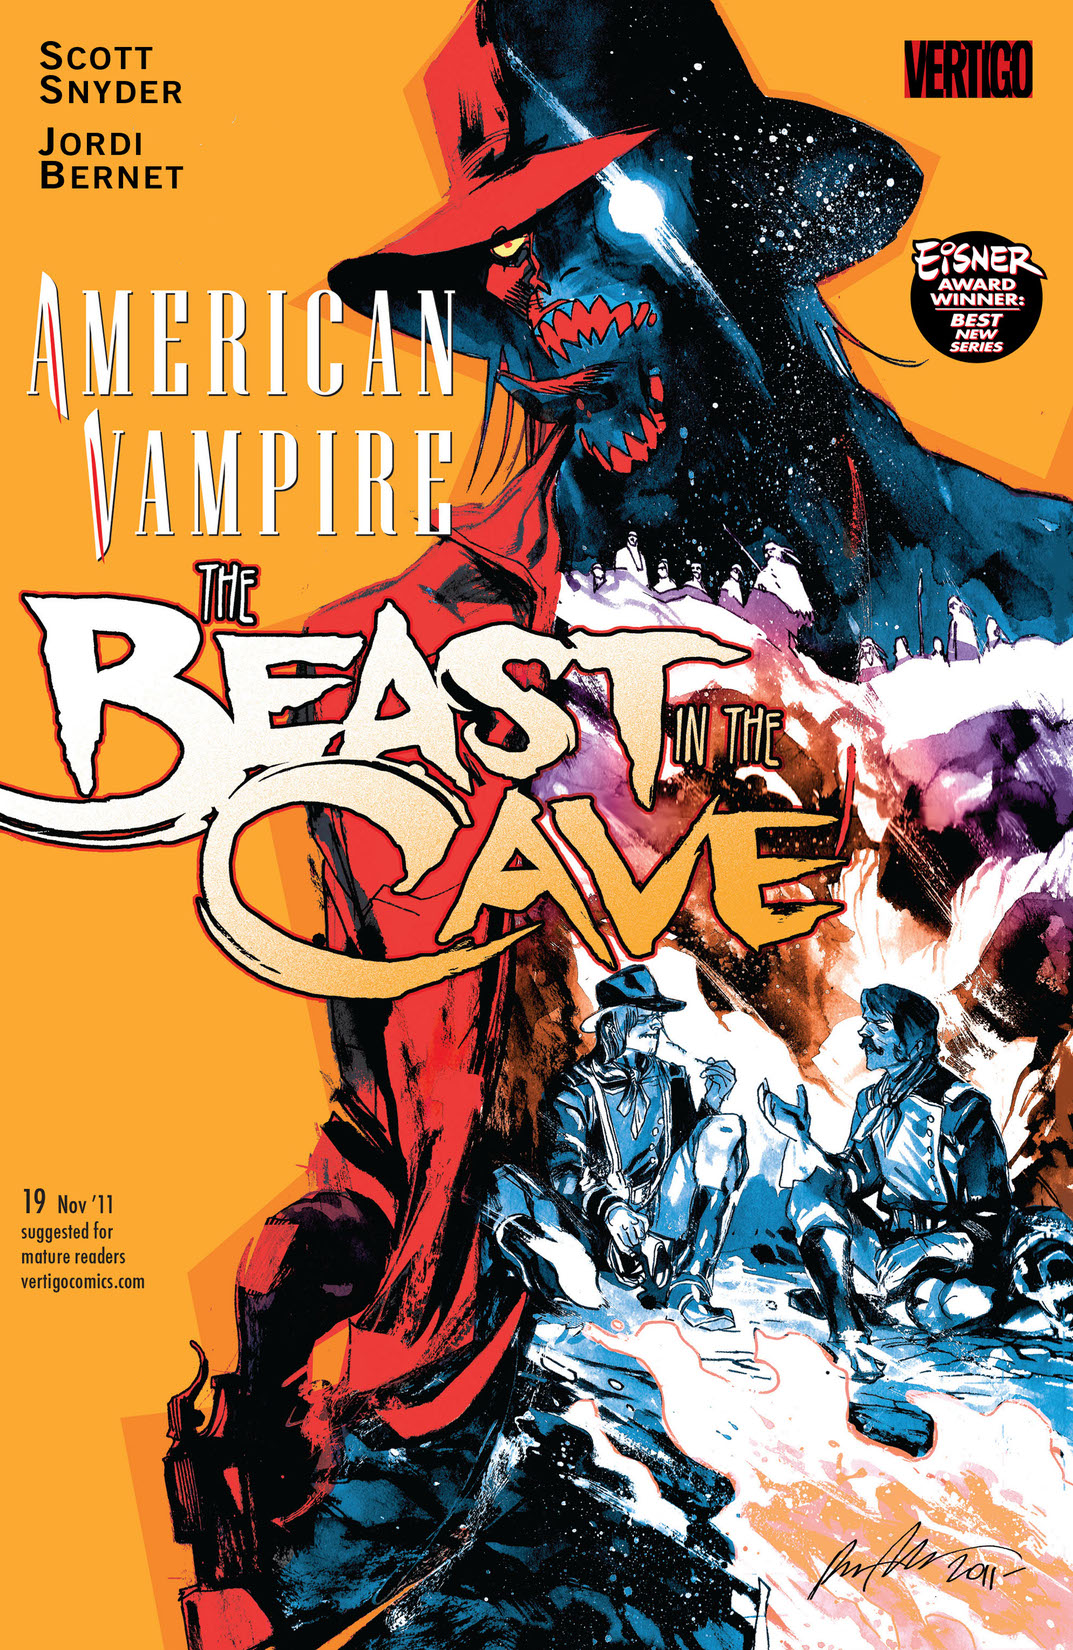 American Vampire #19 preview images